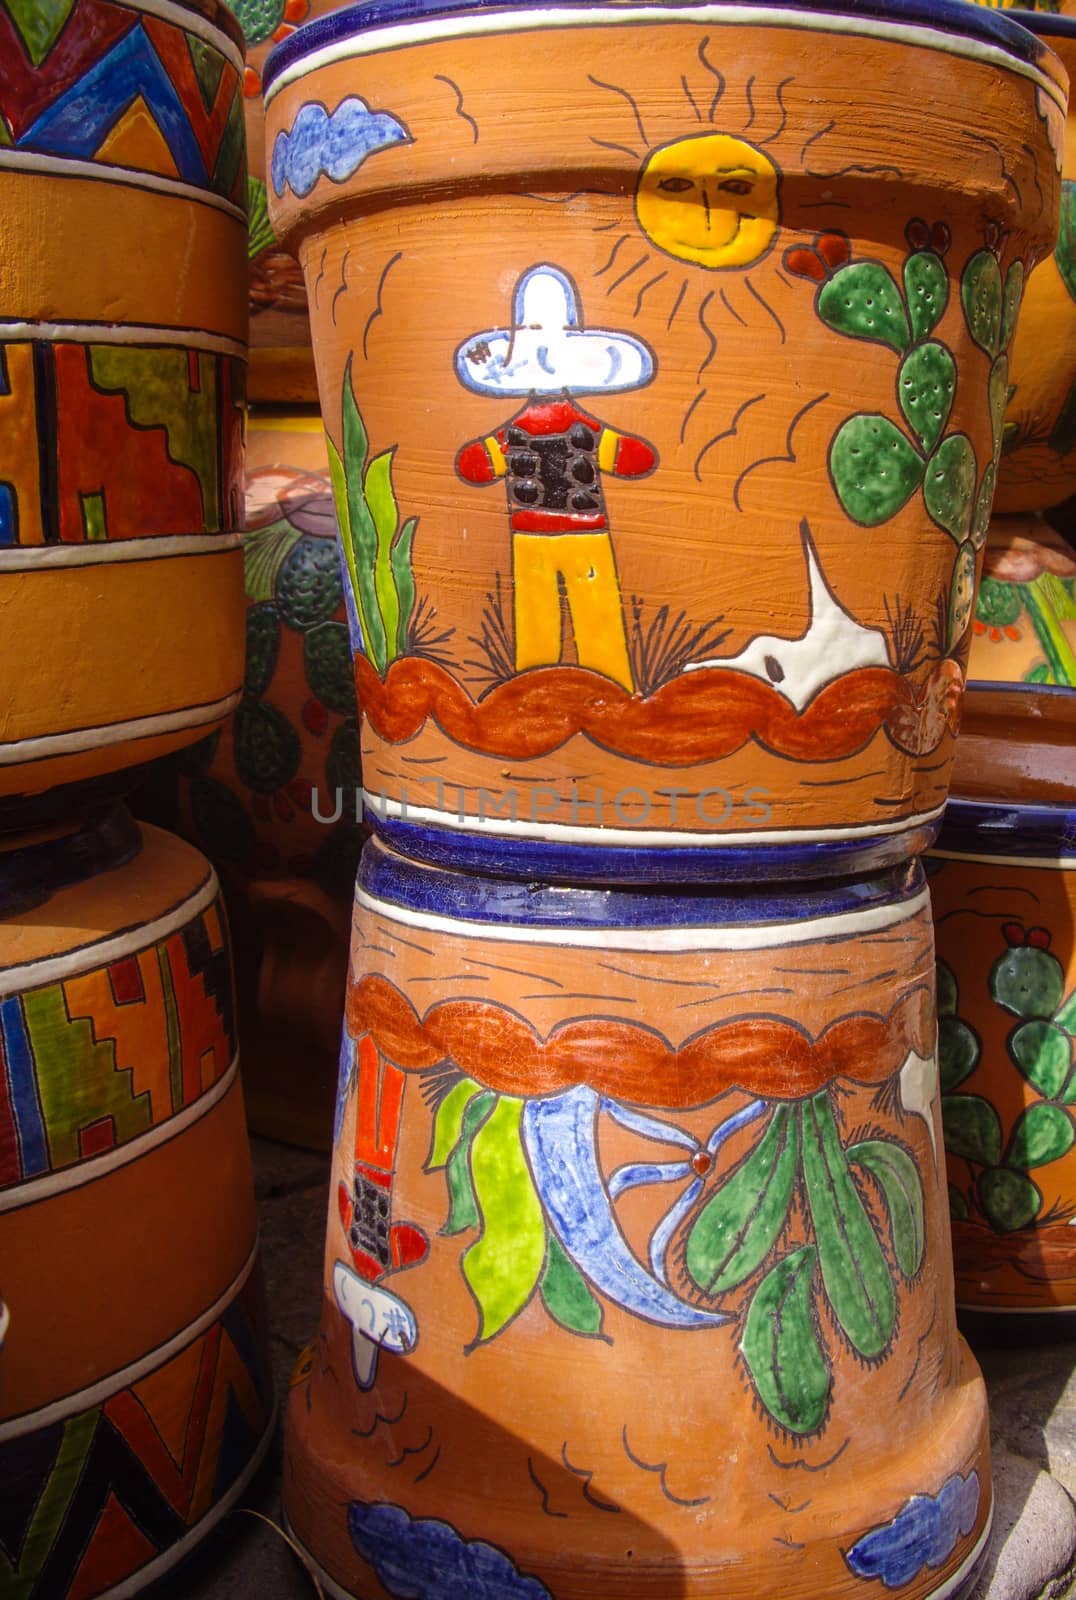 Desert designs on Mexican pottery